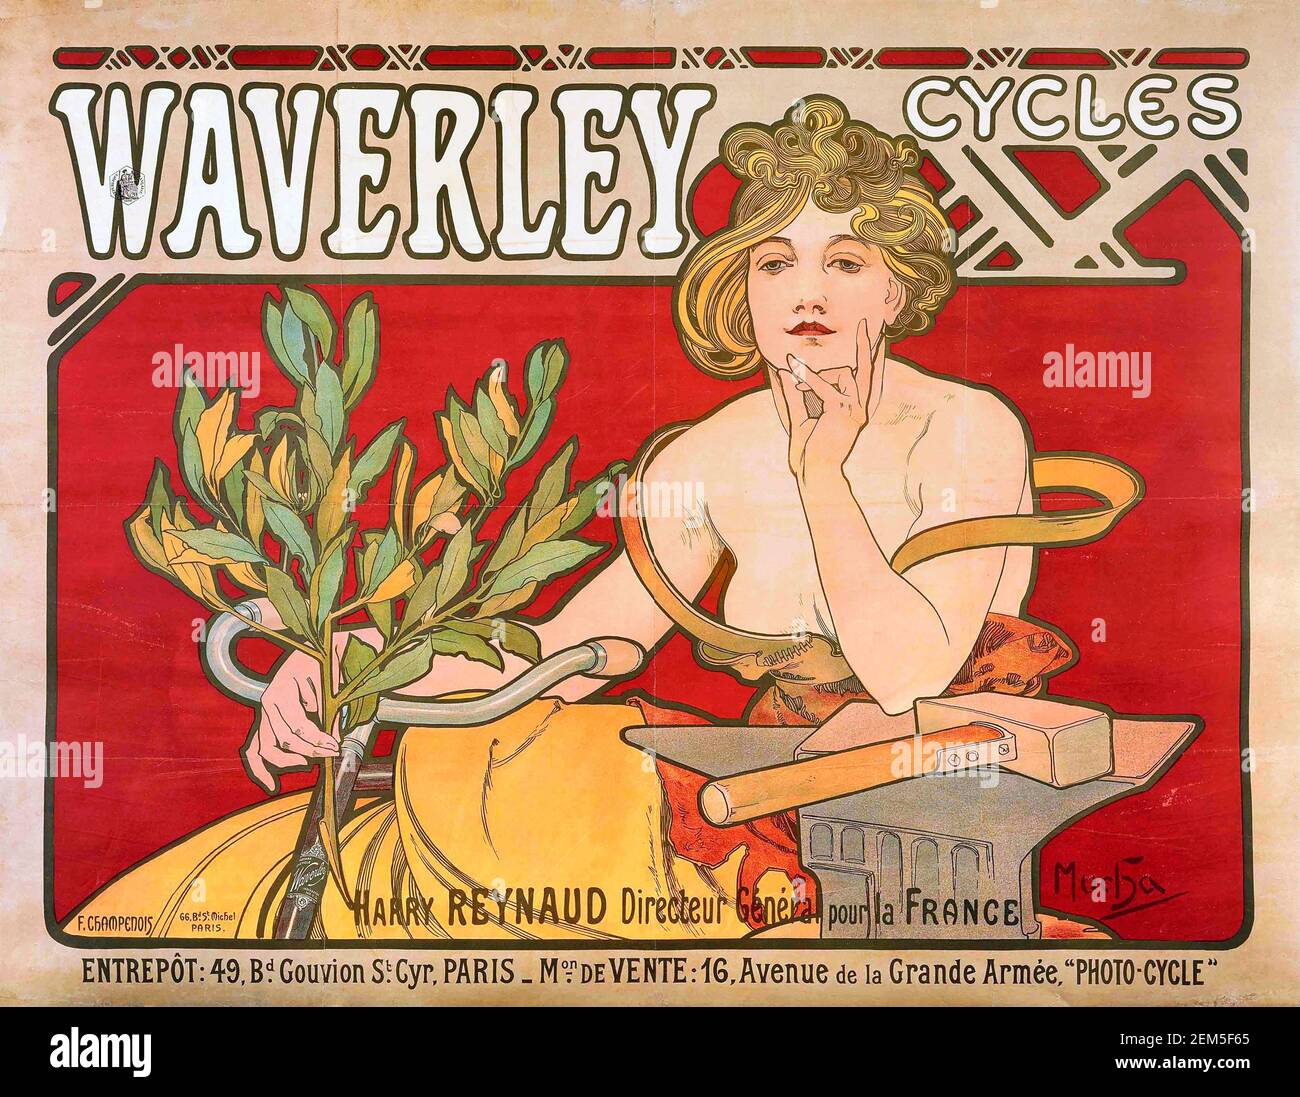 Alphonse Mucha, advertising poster for 'Waverley Cycles', 1898.  Alfons Maria Mucha (1860 -1939) was a Czech Art Nouveau painter, illustrator and graphic artist, Stock Photo